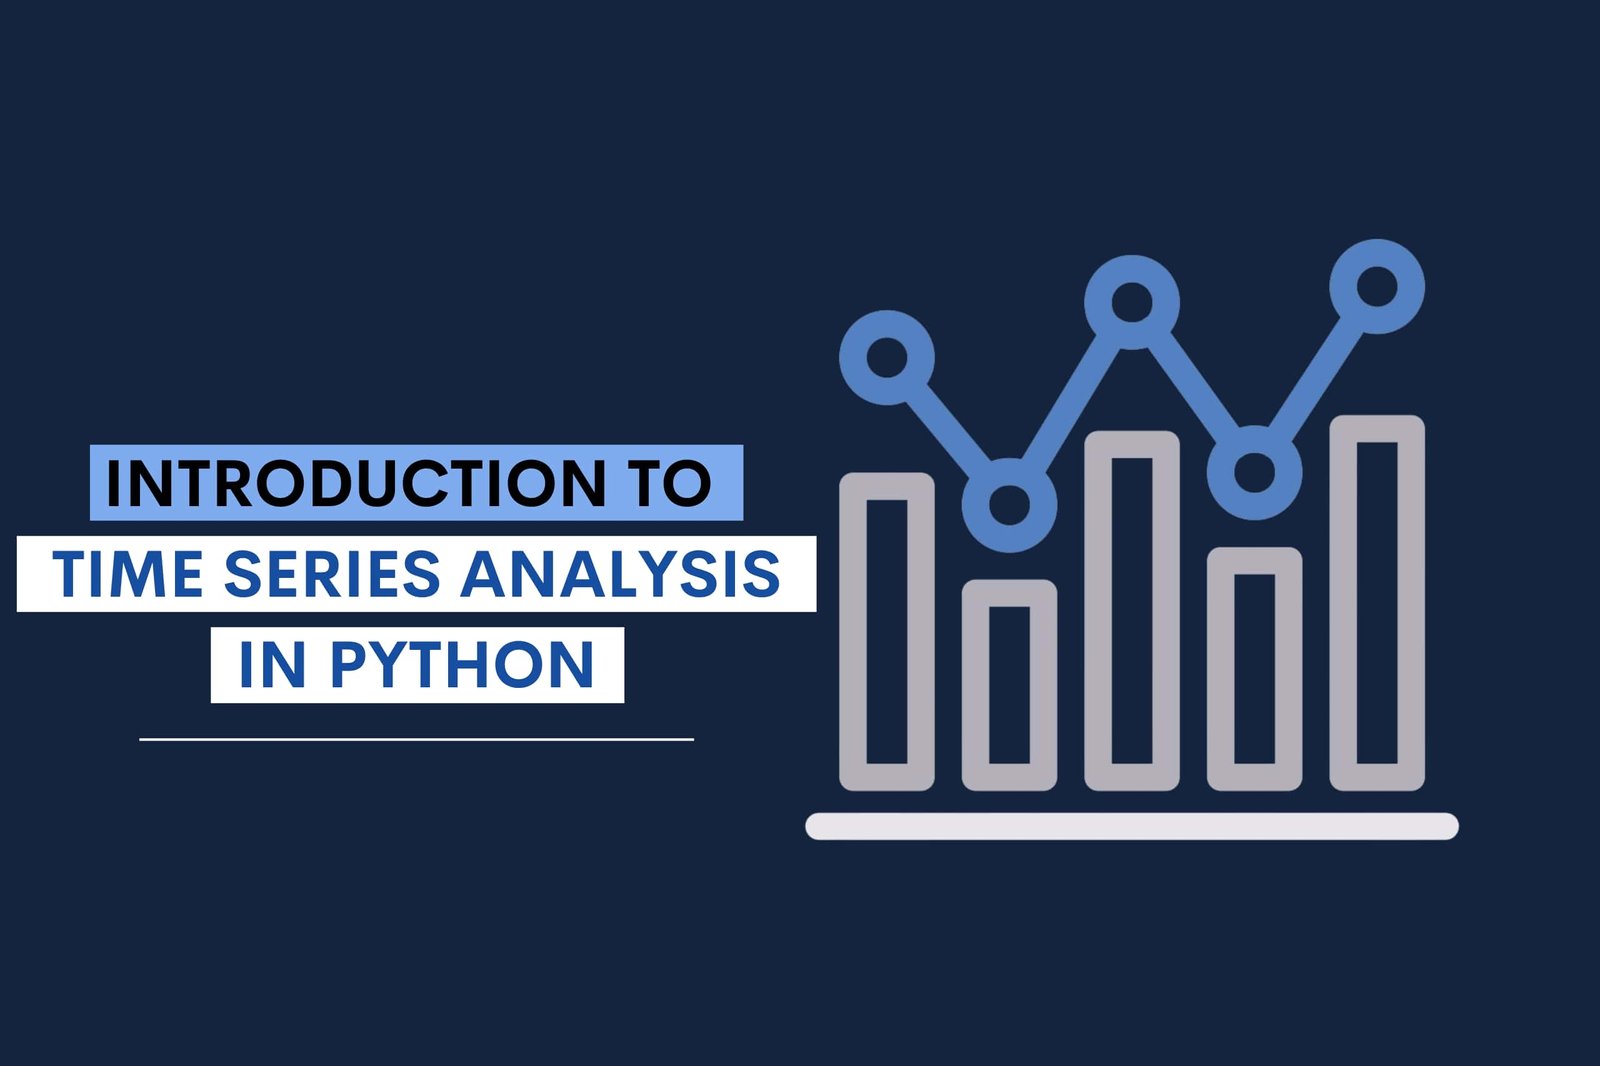 What is Time Series Analysis in Python?